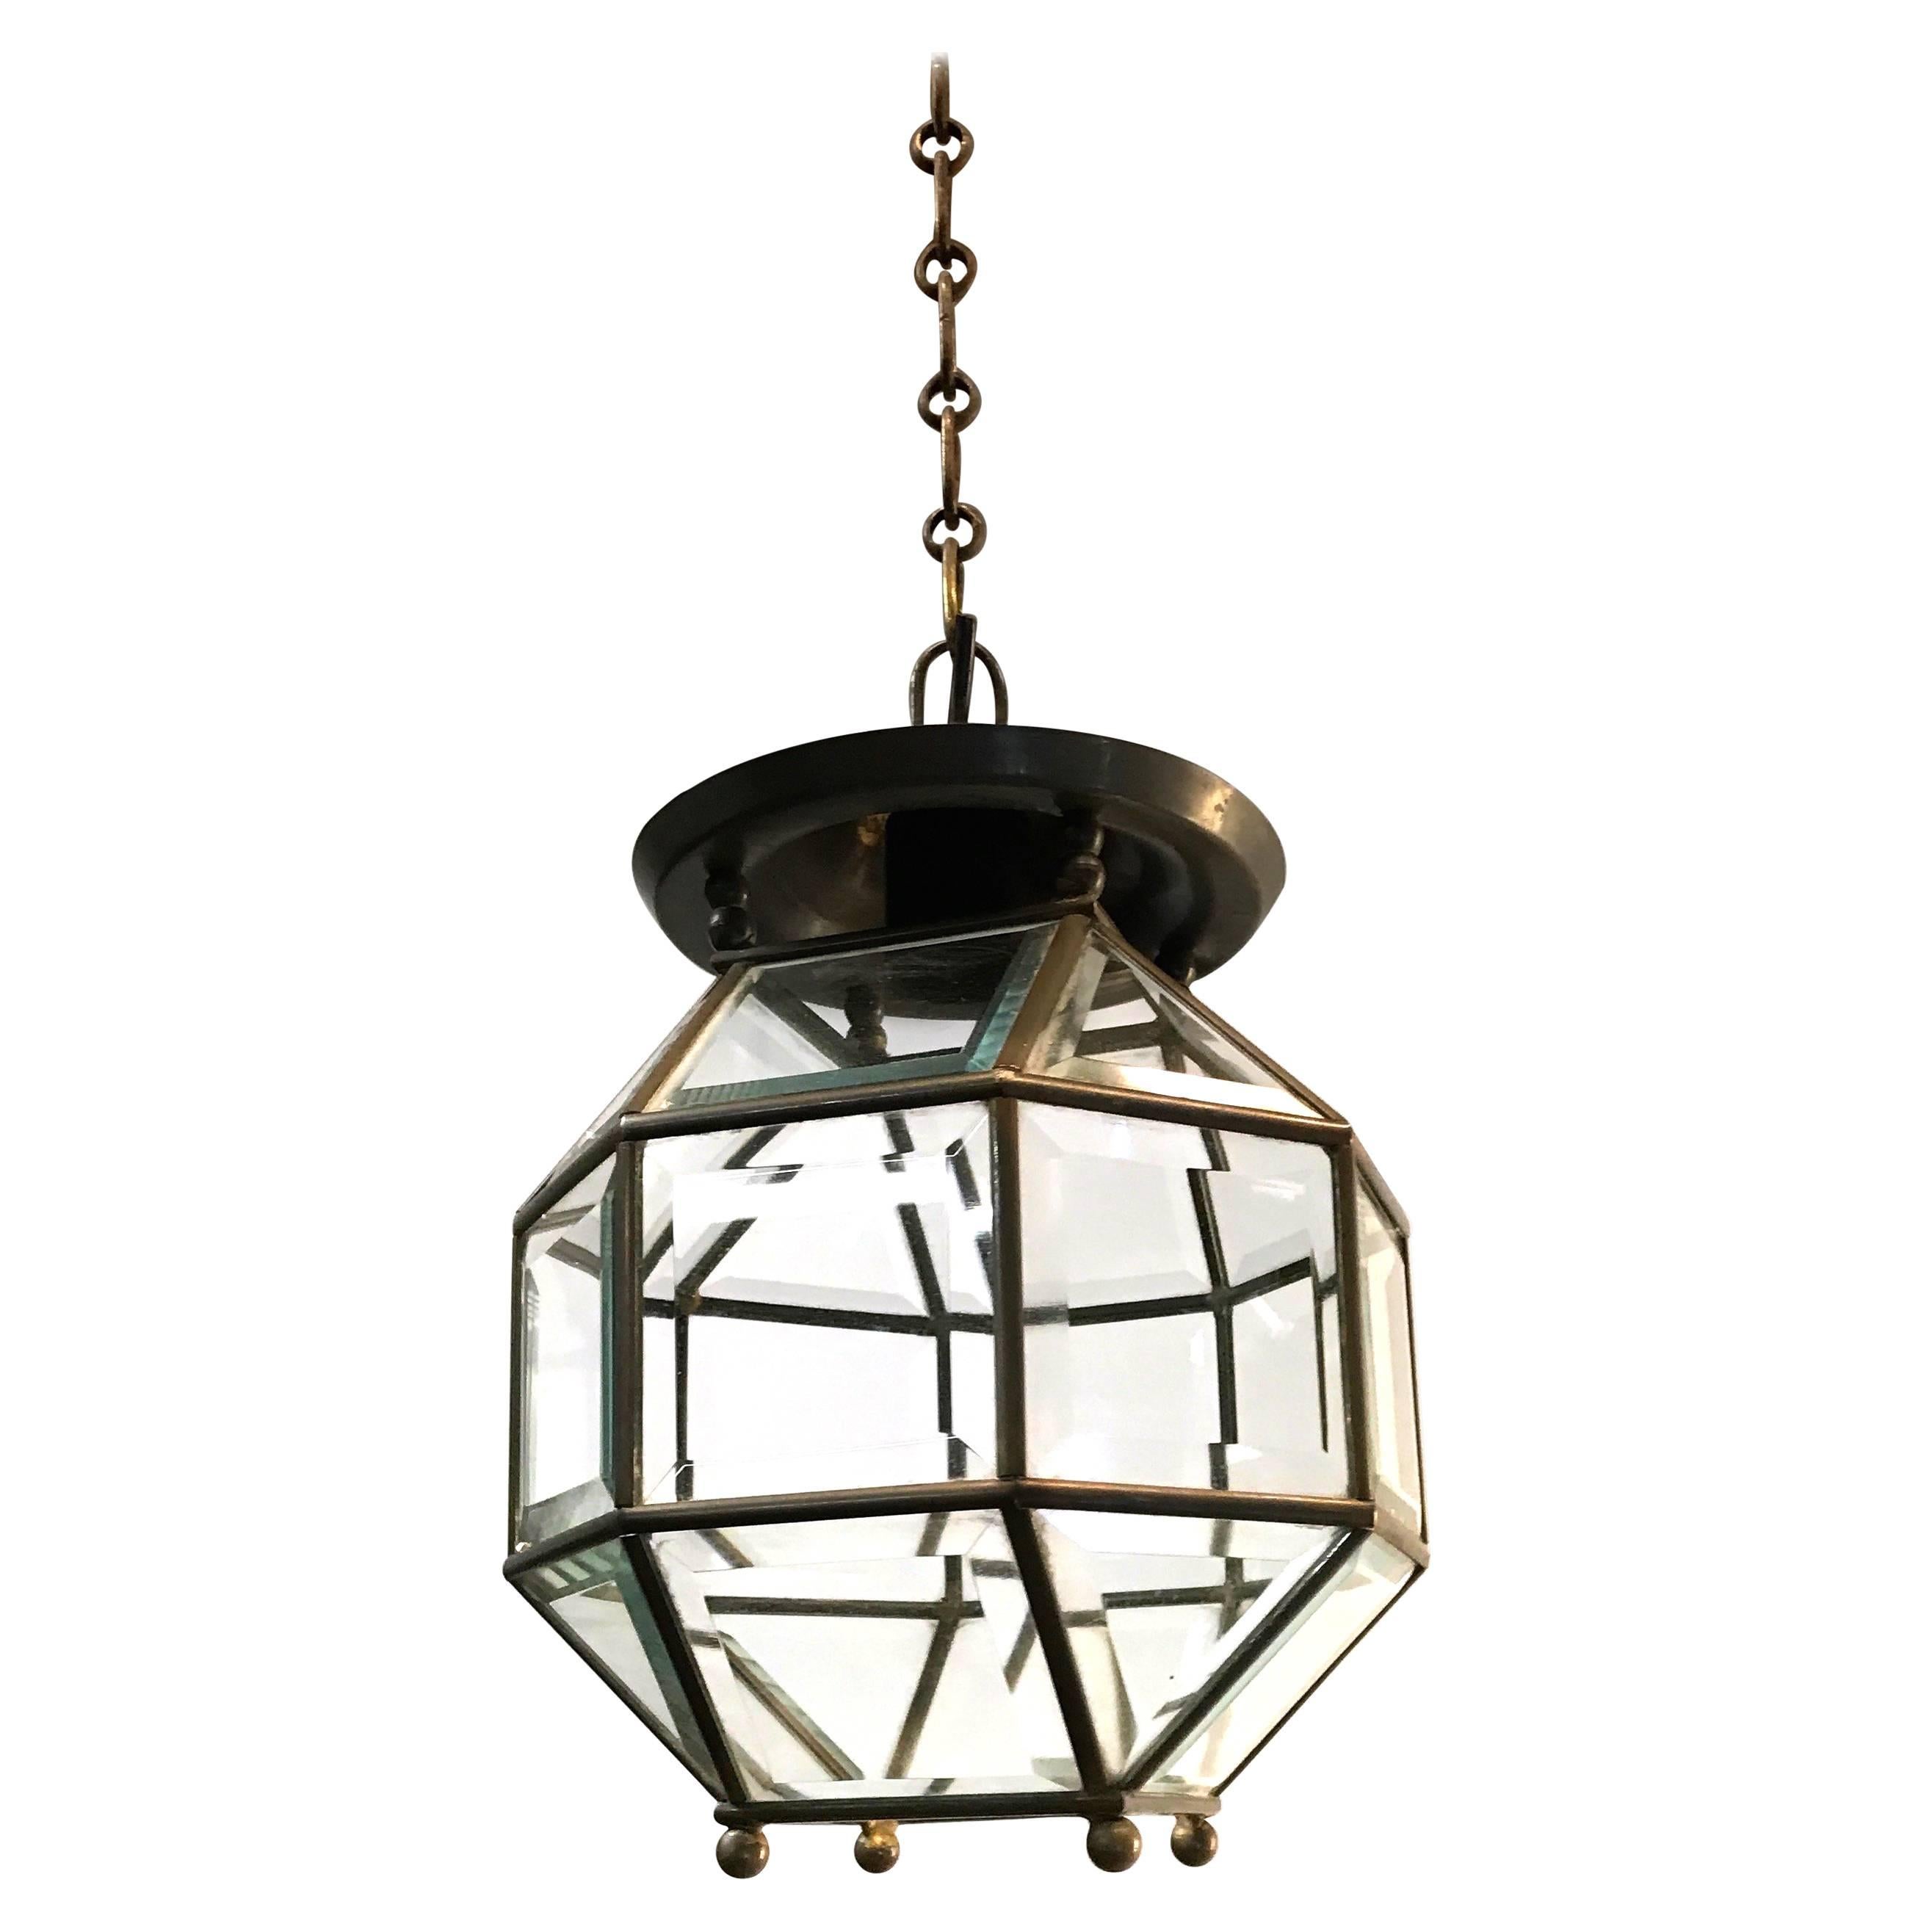 Early 1900s Bevelled Glass & Brass Pendant Cubic Ceiling Light  Adolf Loos Style